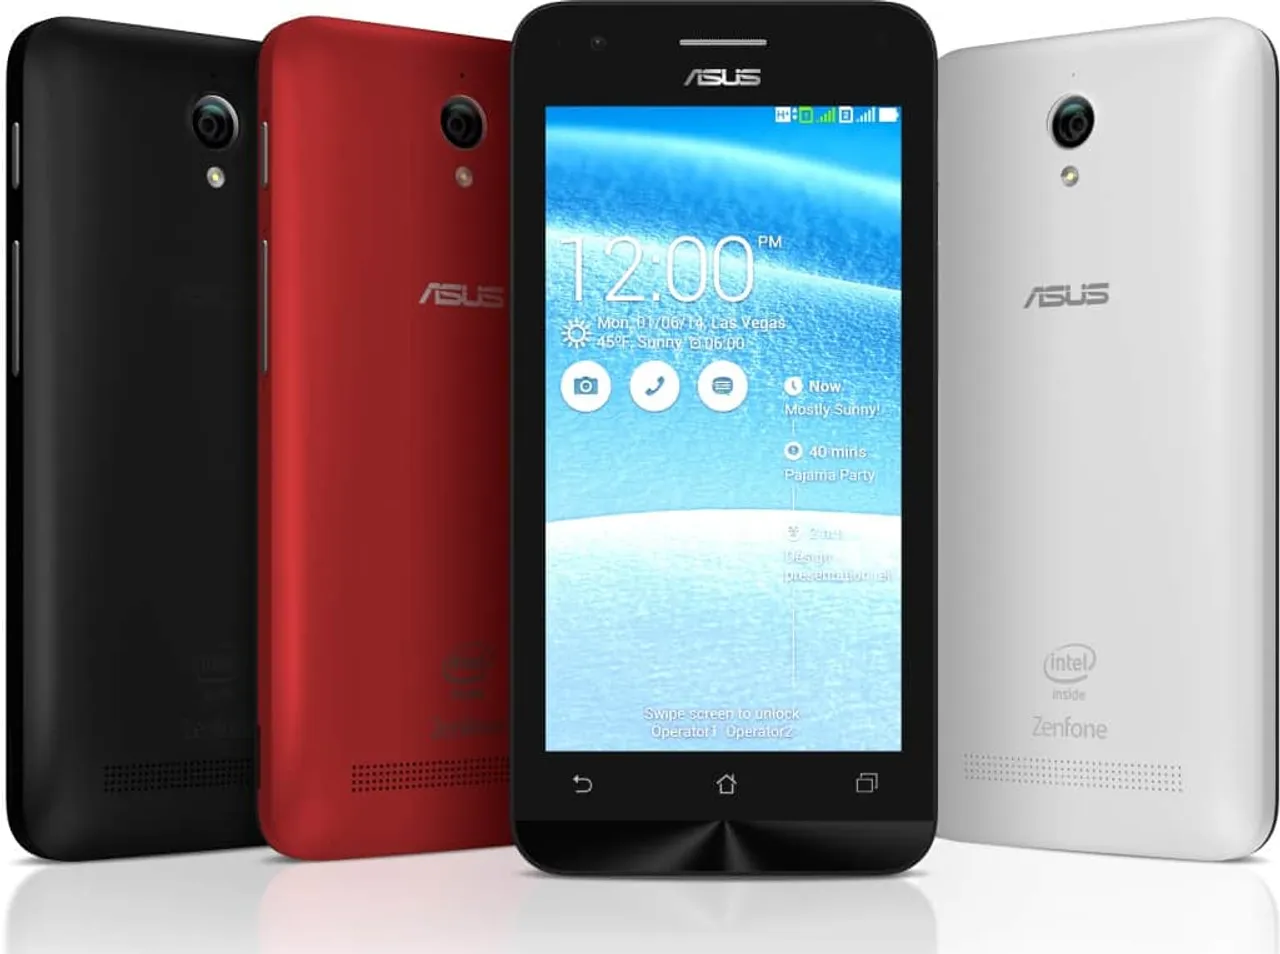 ASUS brings Zenfone C-ZC451CG in India in first wave launch